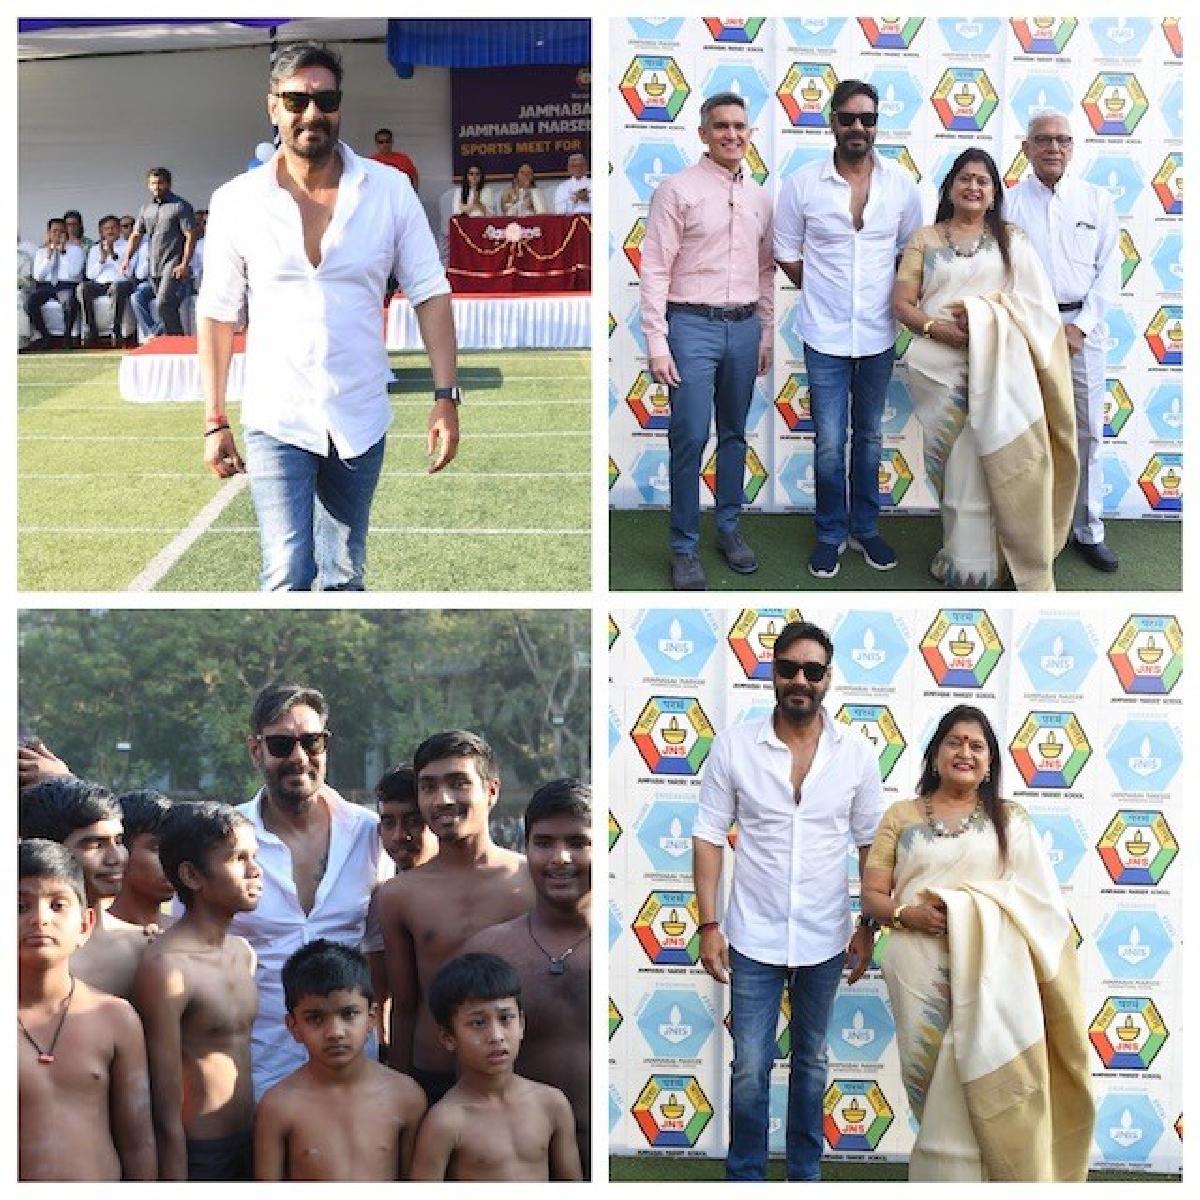 Ajay Devgn Applauds The Special Kids And Their Sporting Spirit